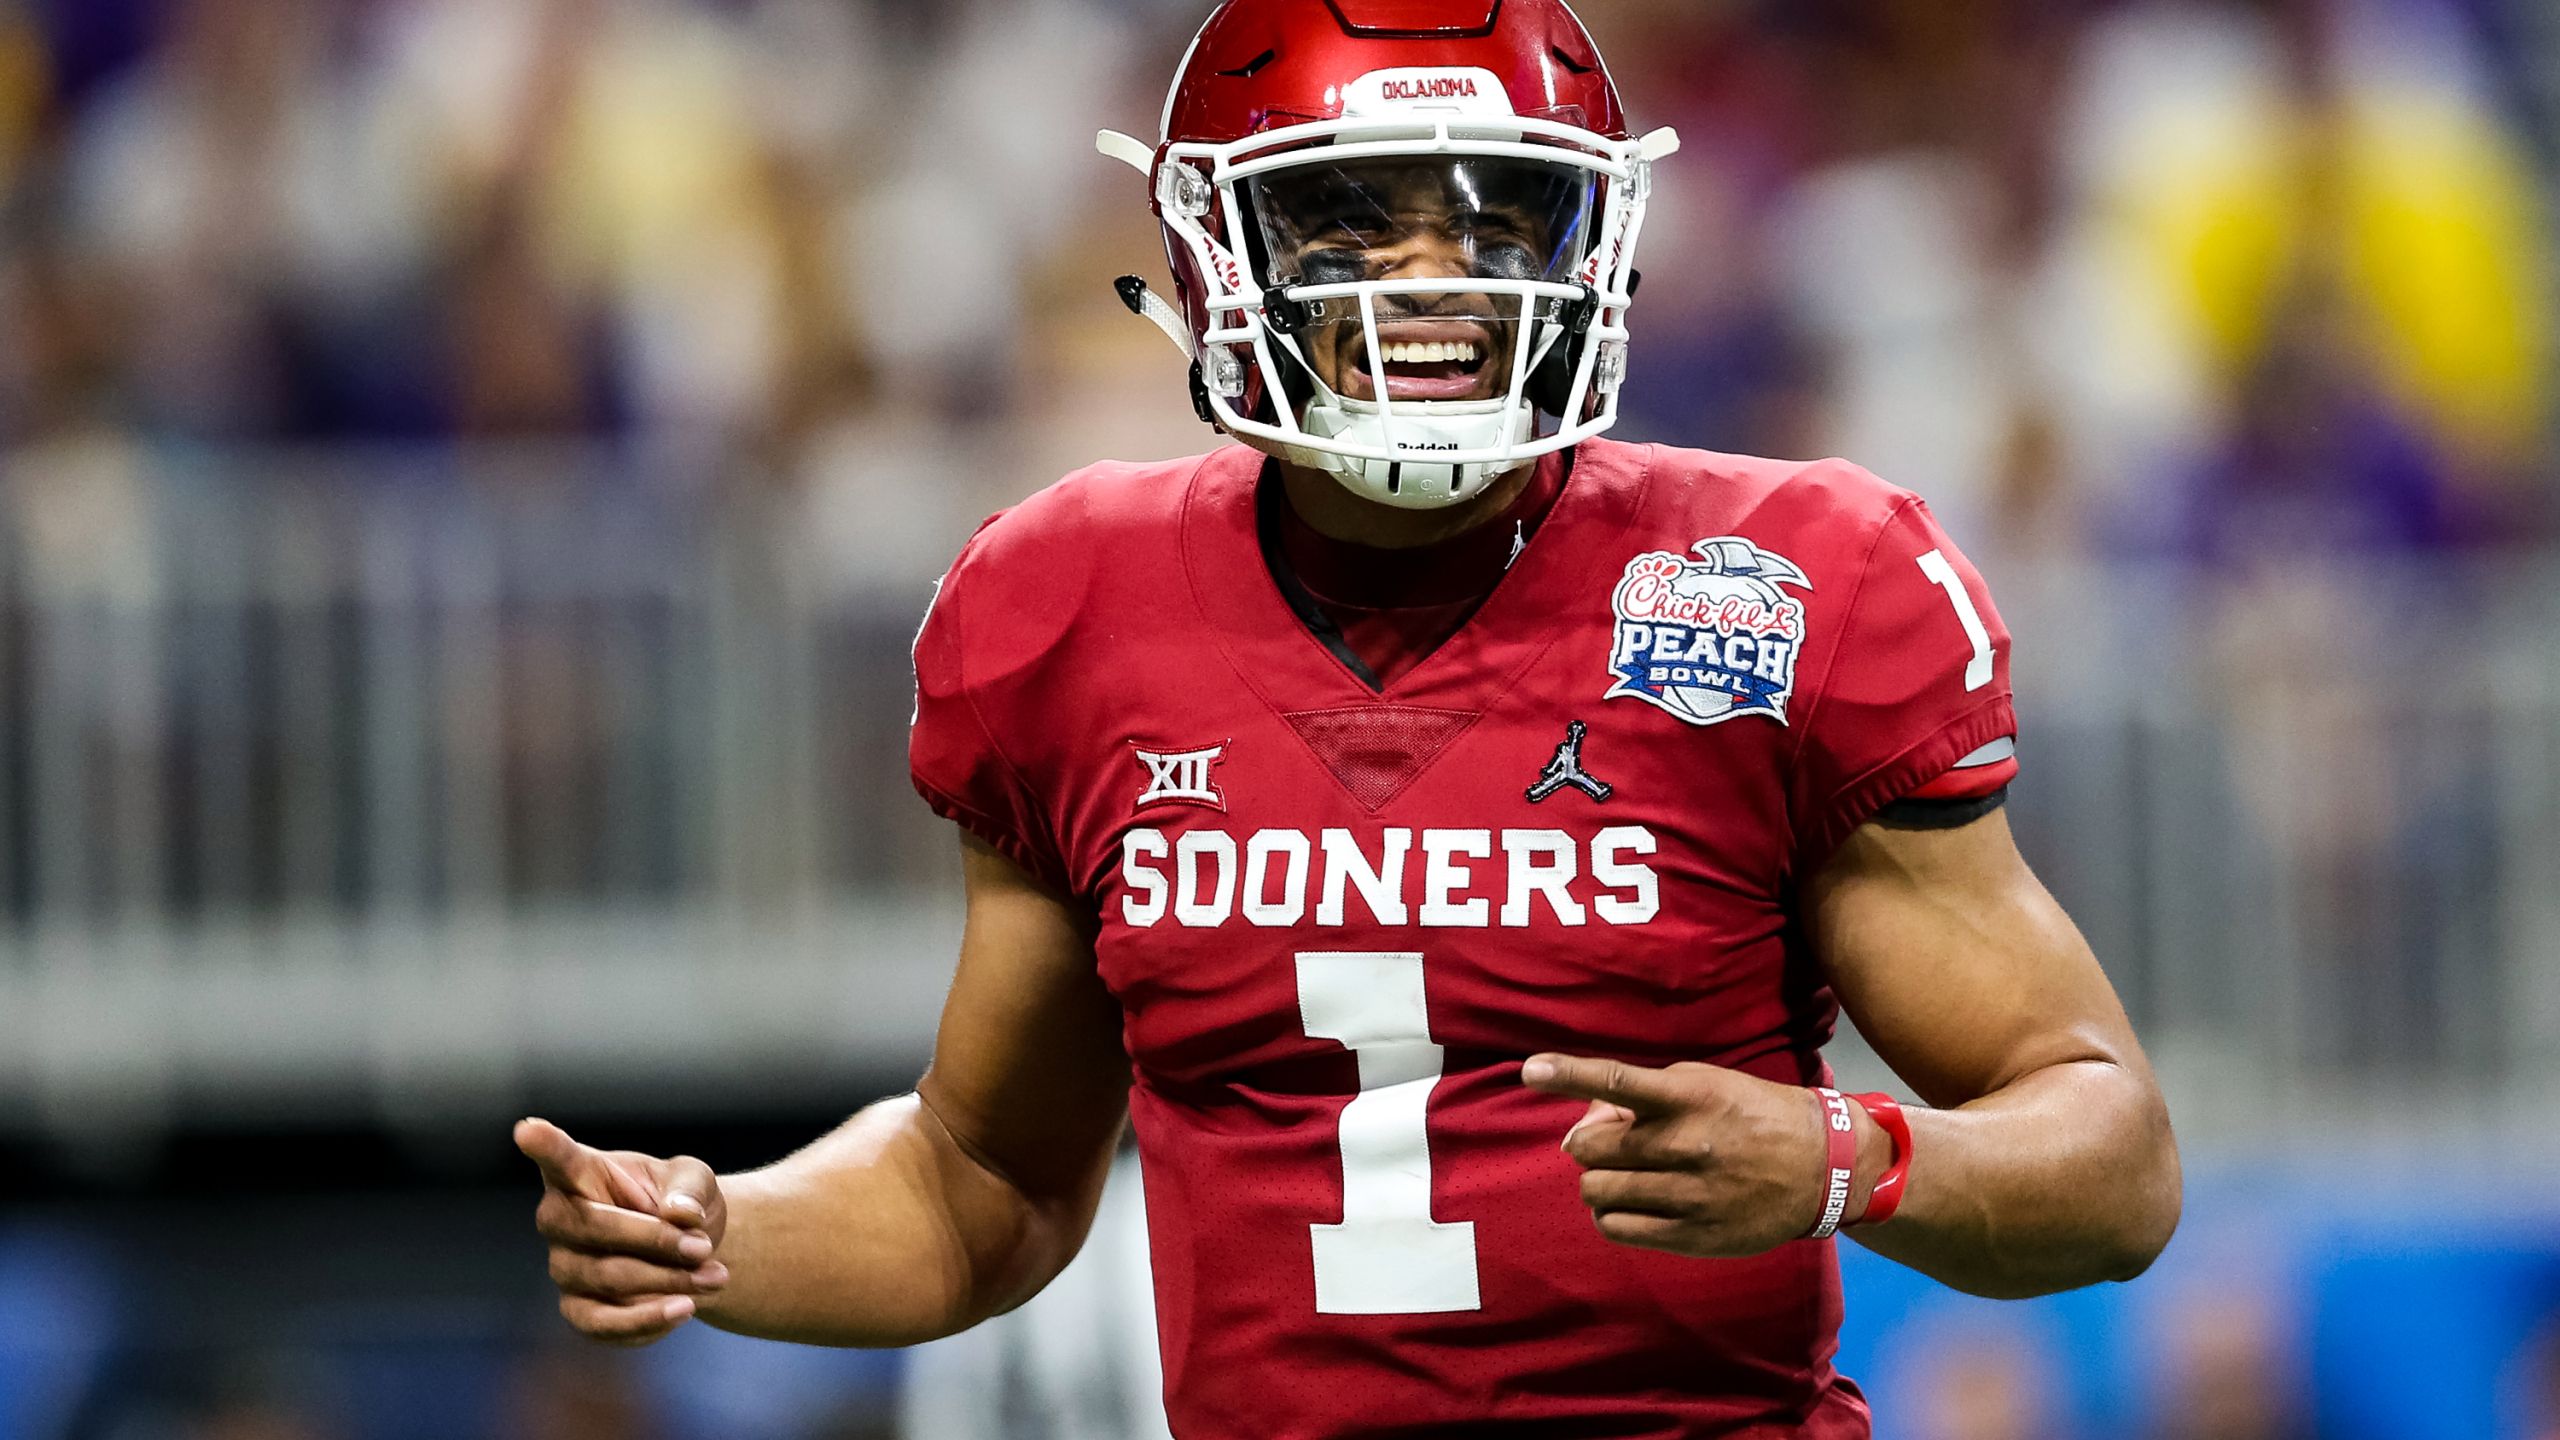 Eagles draft Oklahoma QB Jalen Hurts with 53rd overall pick in the NFL Draft